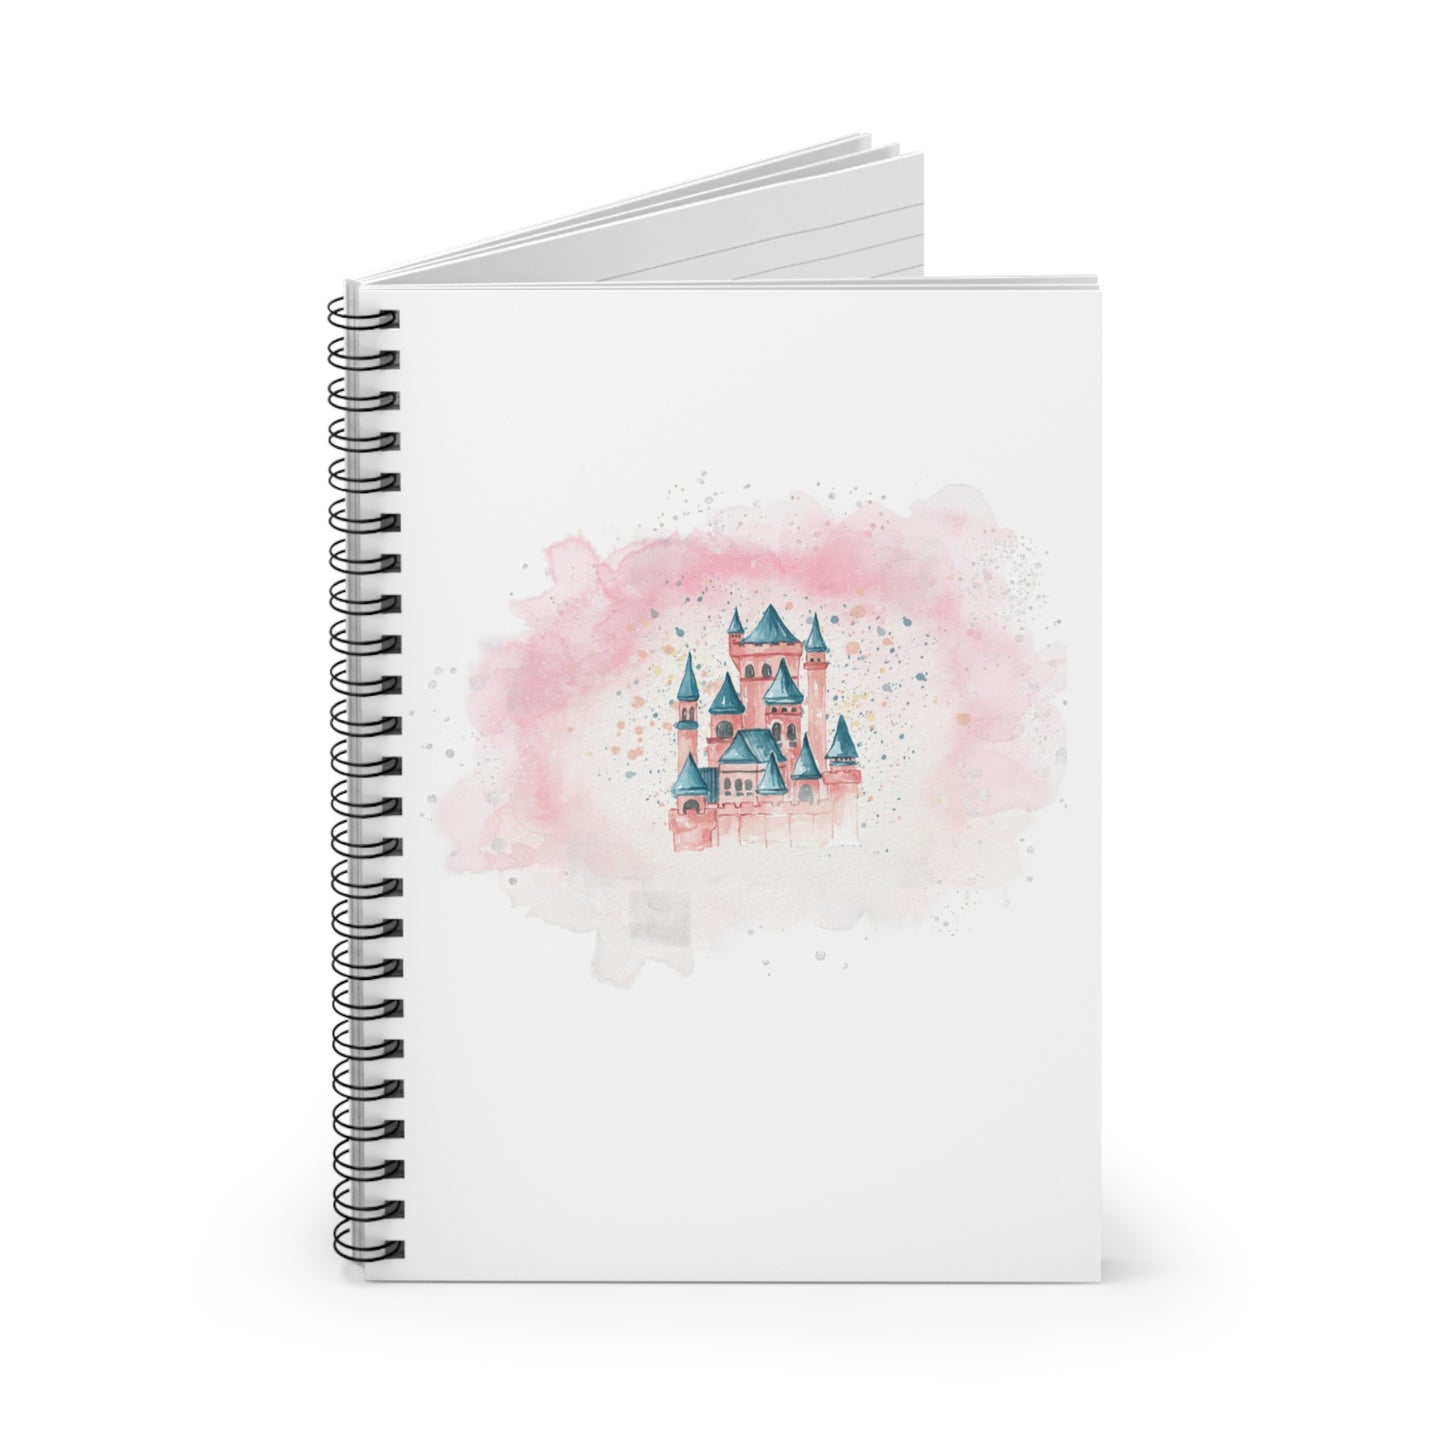 Fairytale Castle Spiral Notebook - Ruled Line